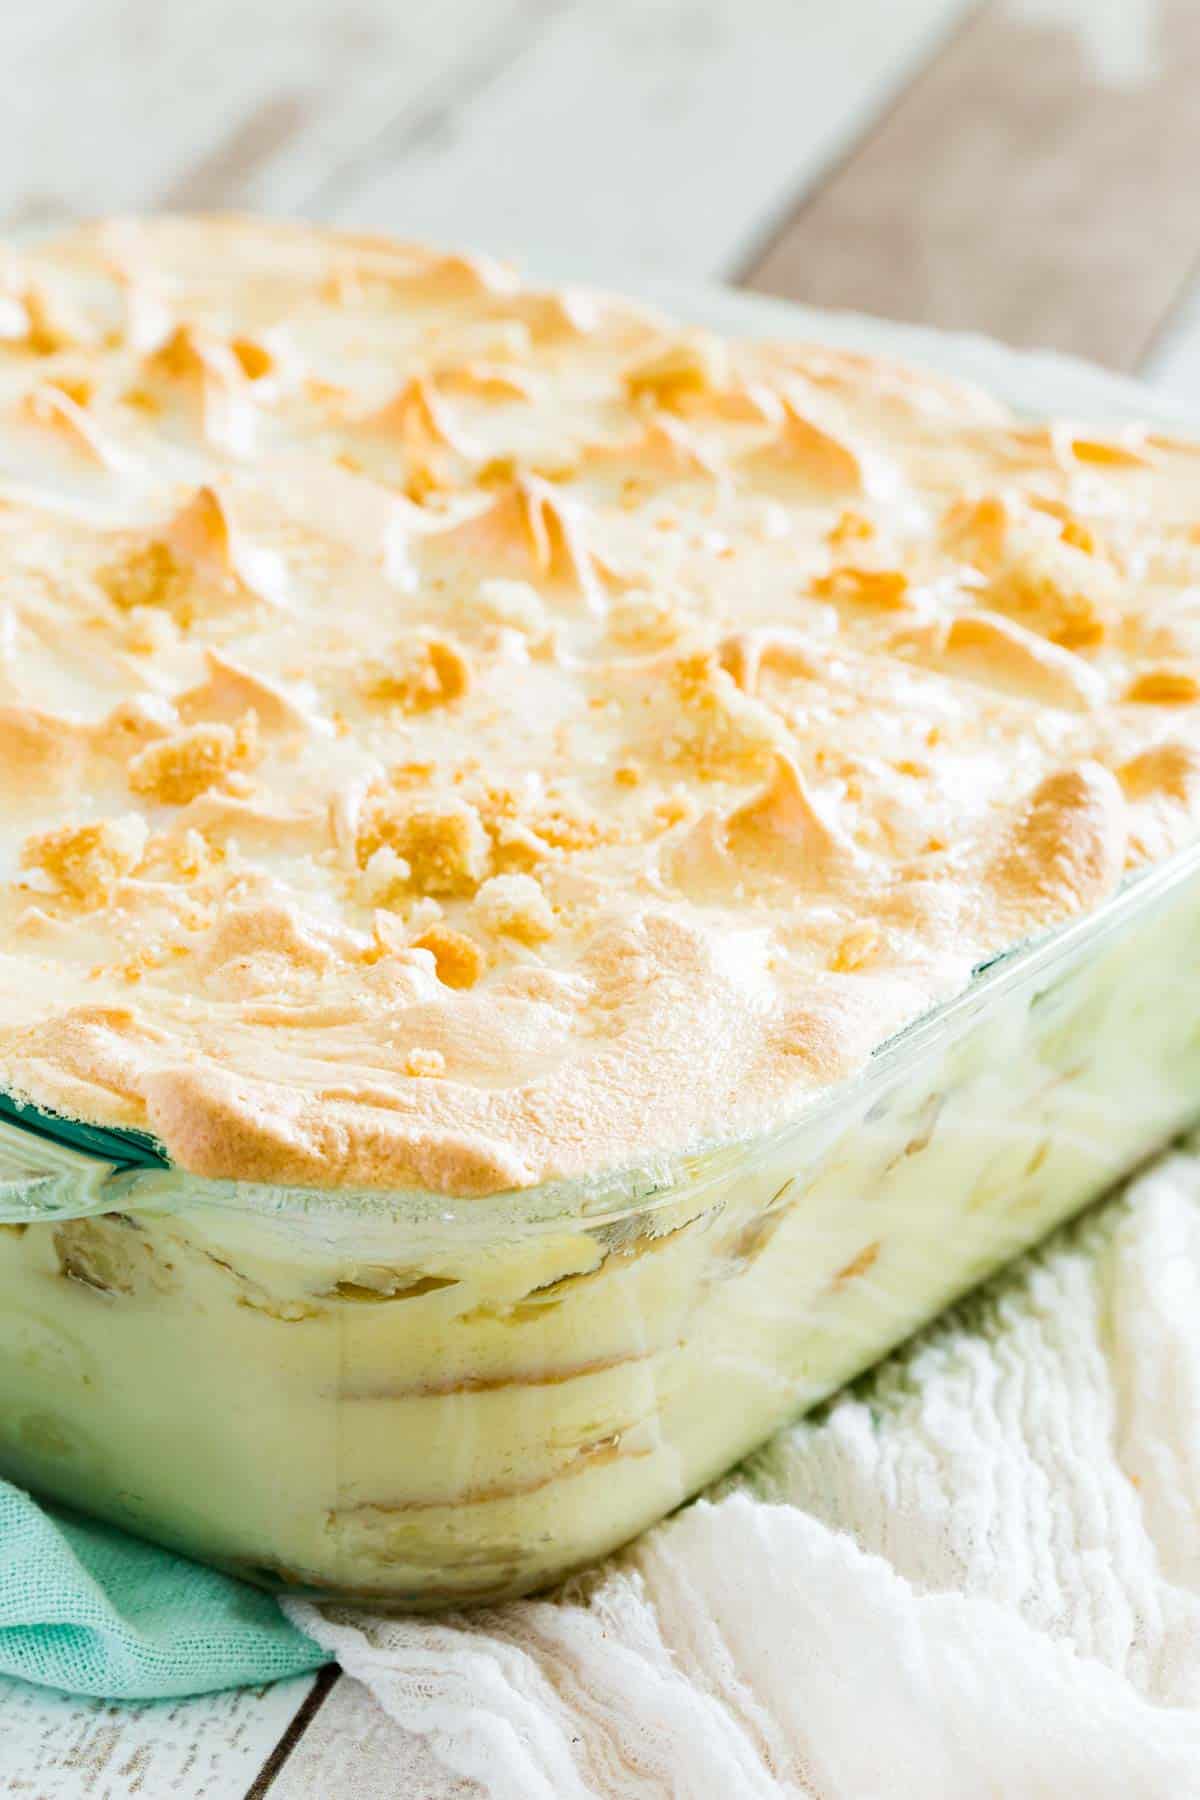 A glass pan of homemade banana pudding is shown topped with meringue.